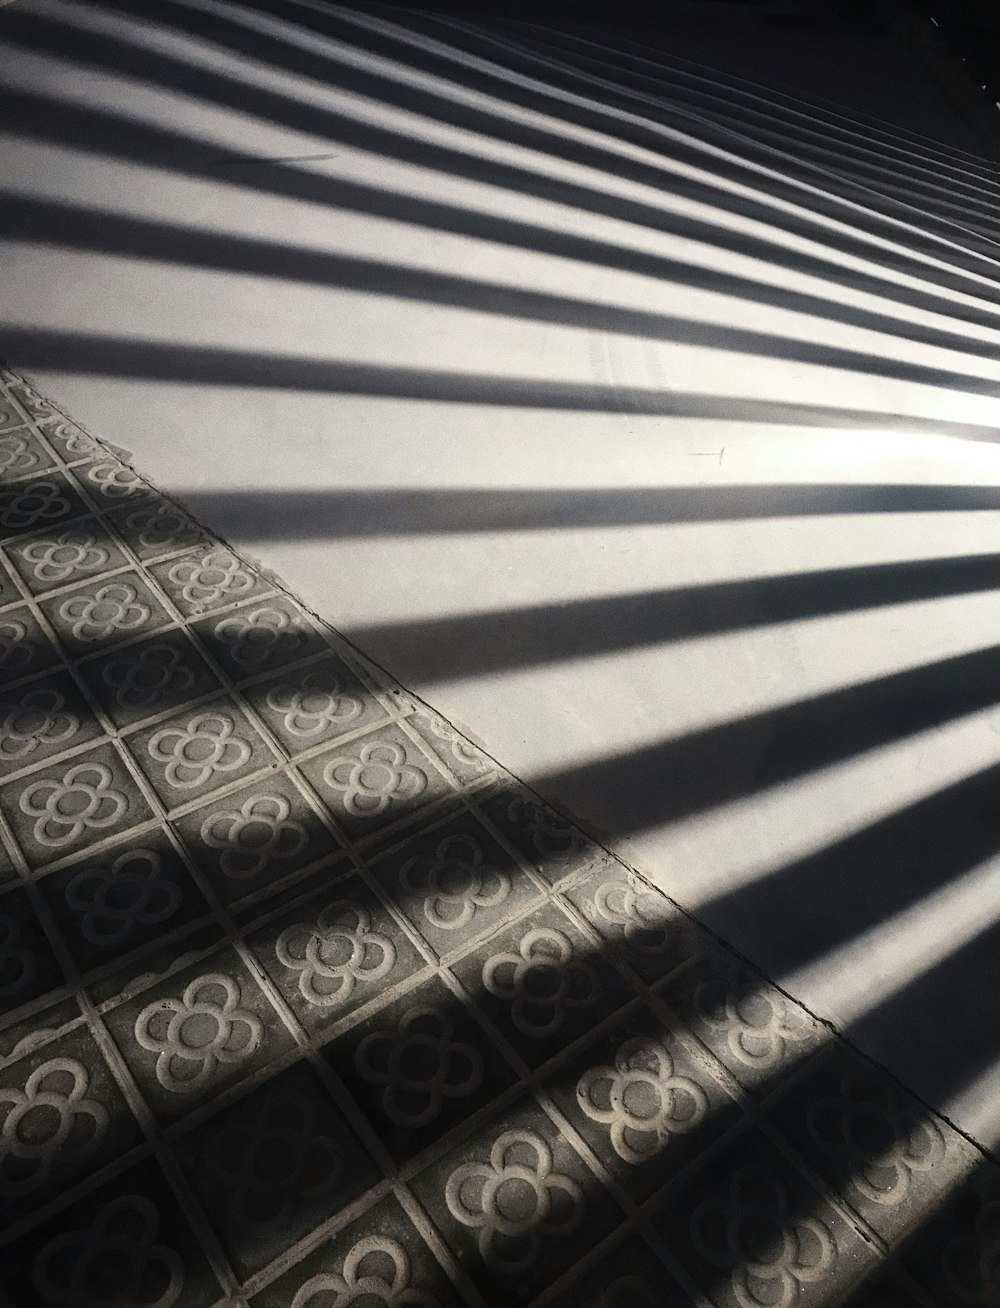 the shadow of a building on a tiled floor